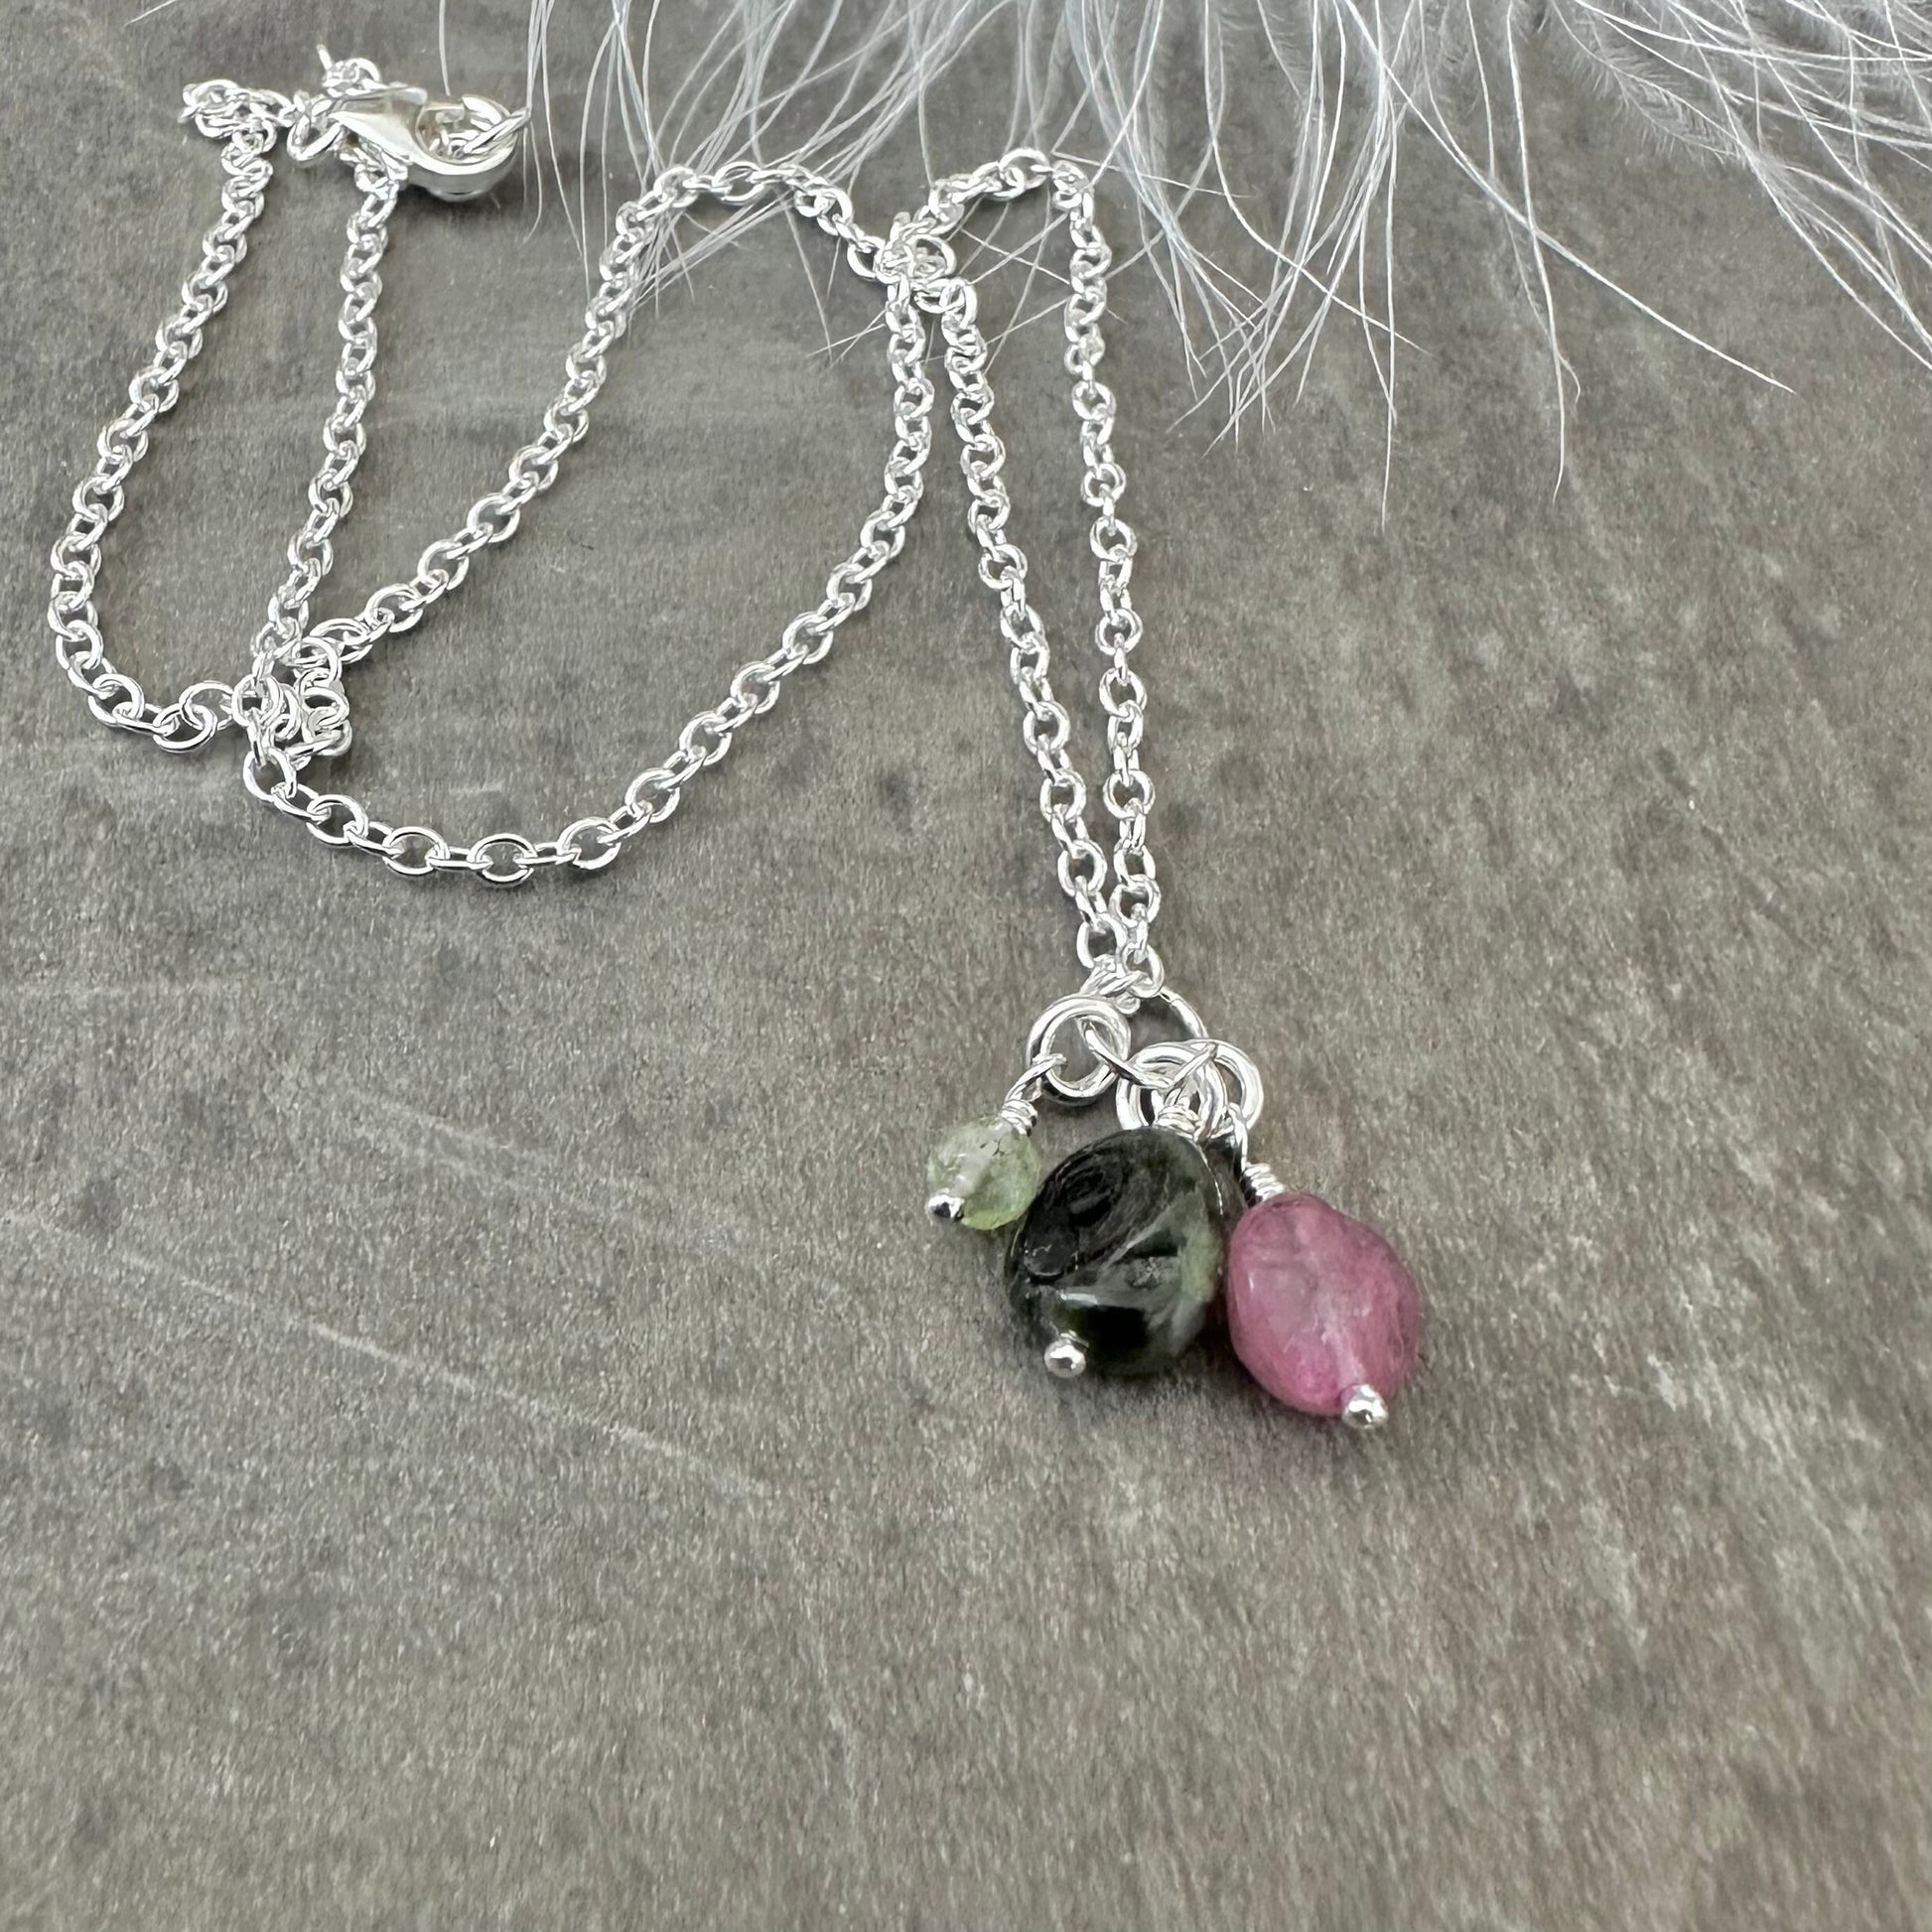 Mixed Tourmaline Nugget necklace, October birthstone jewellery sterling silver